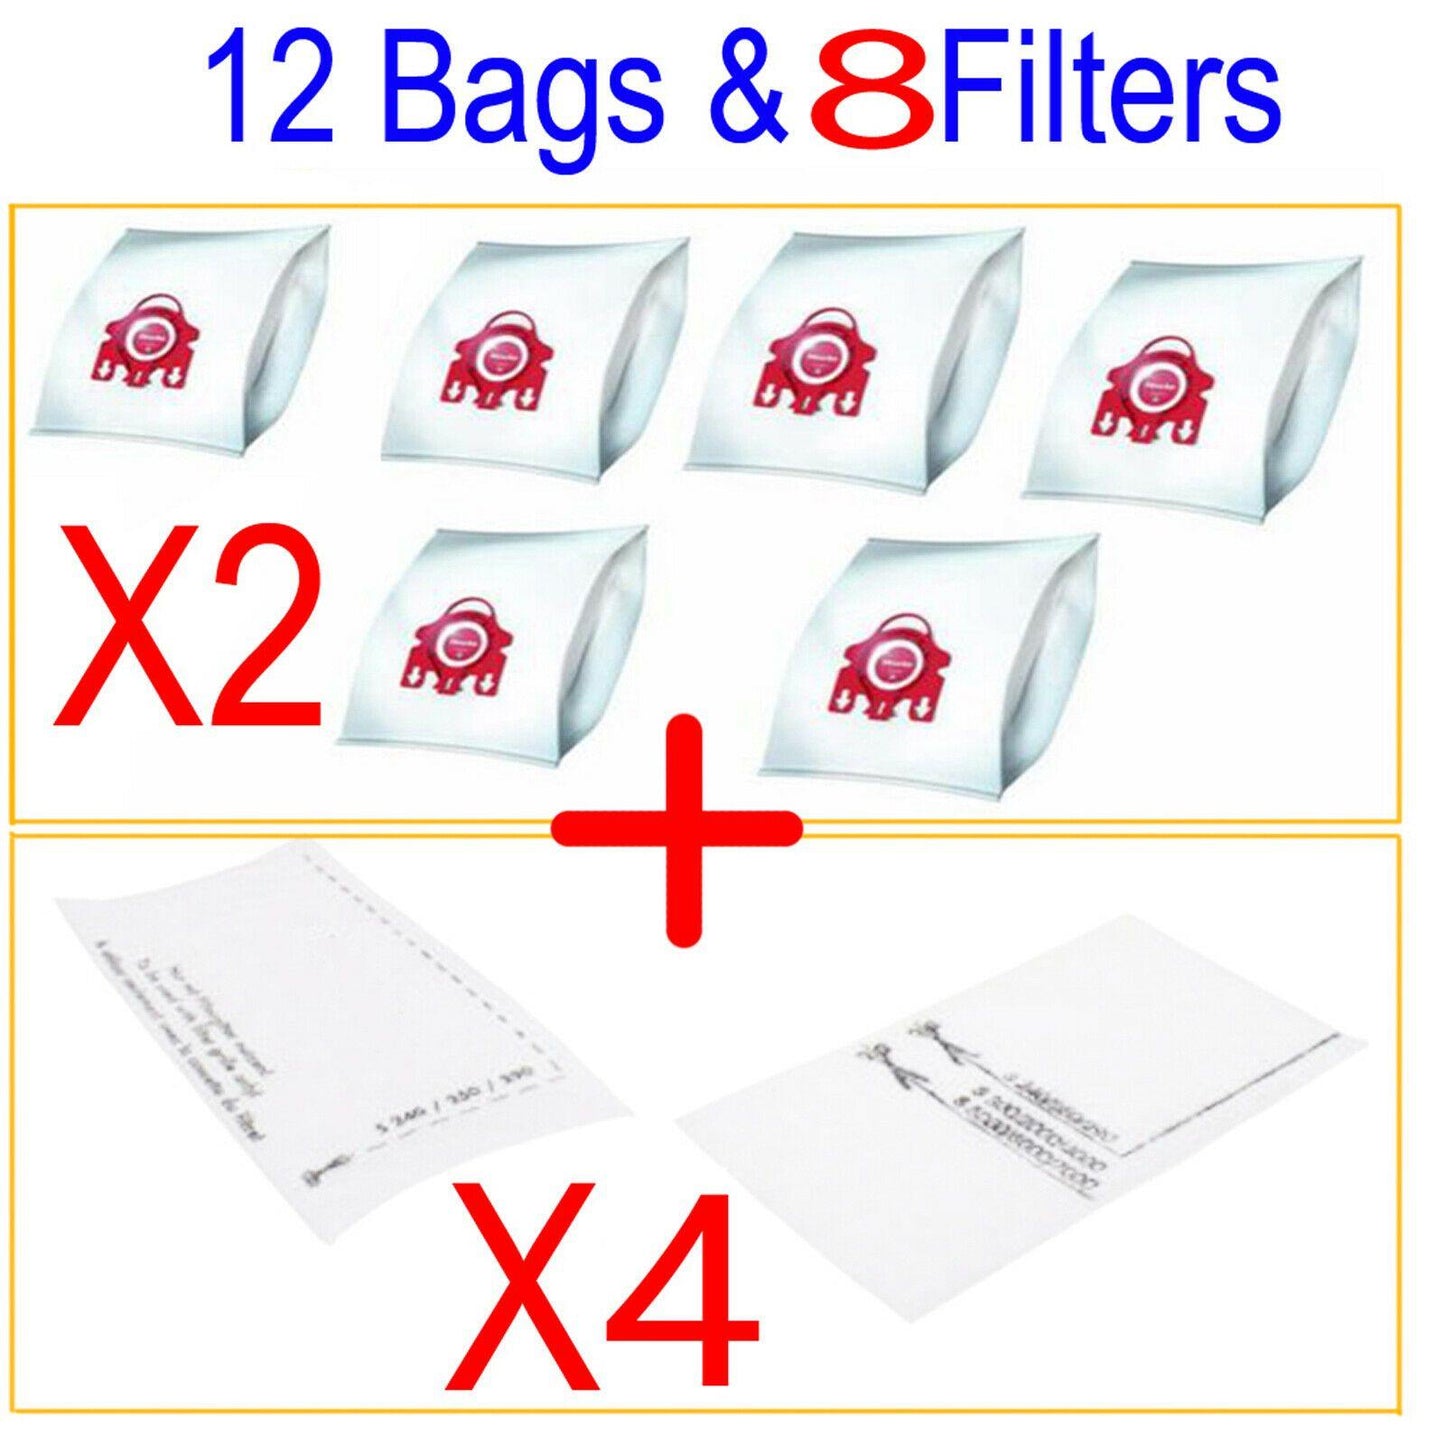 12 Synthetic Bags & 8 Filters For Miele FJM Compact C1 C2 S4 S6 S291 S381 S571 Sparesbarn